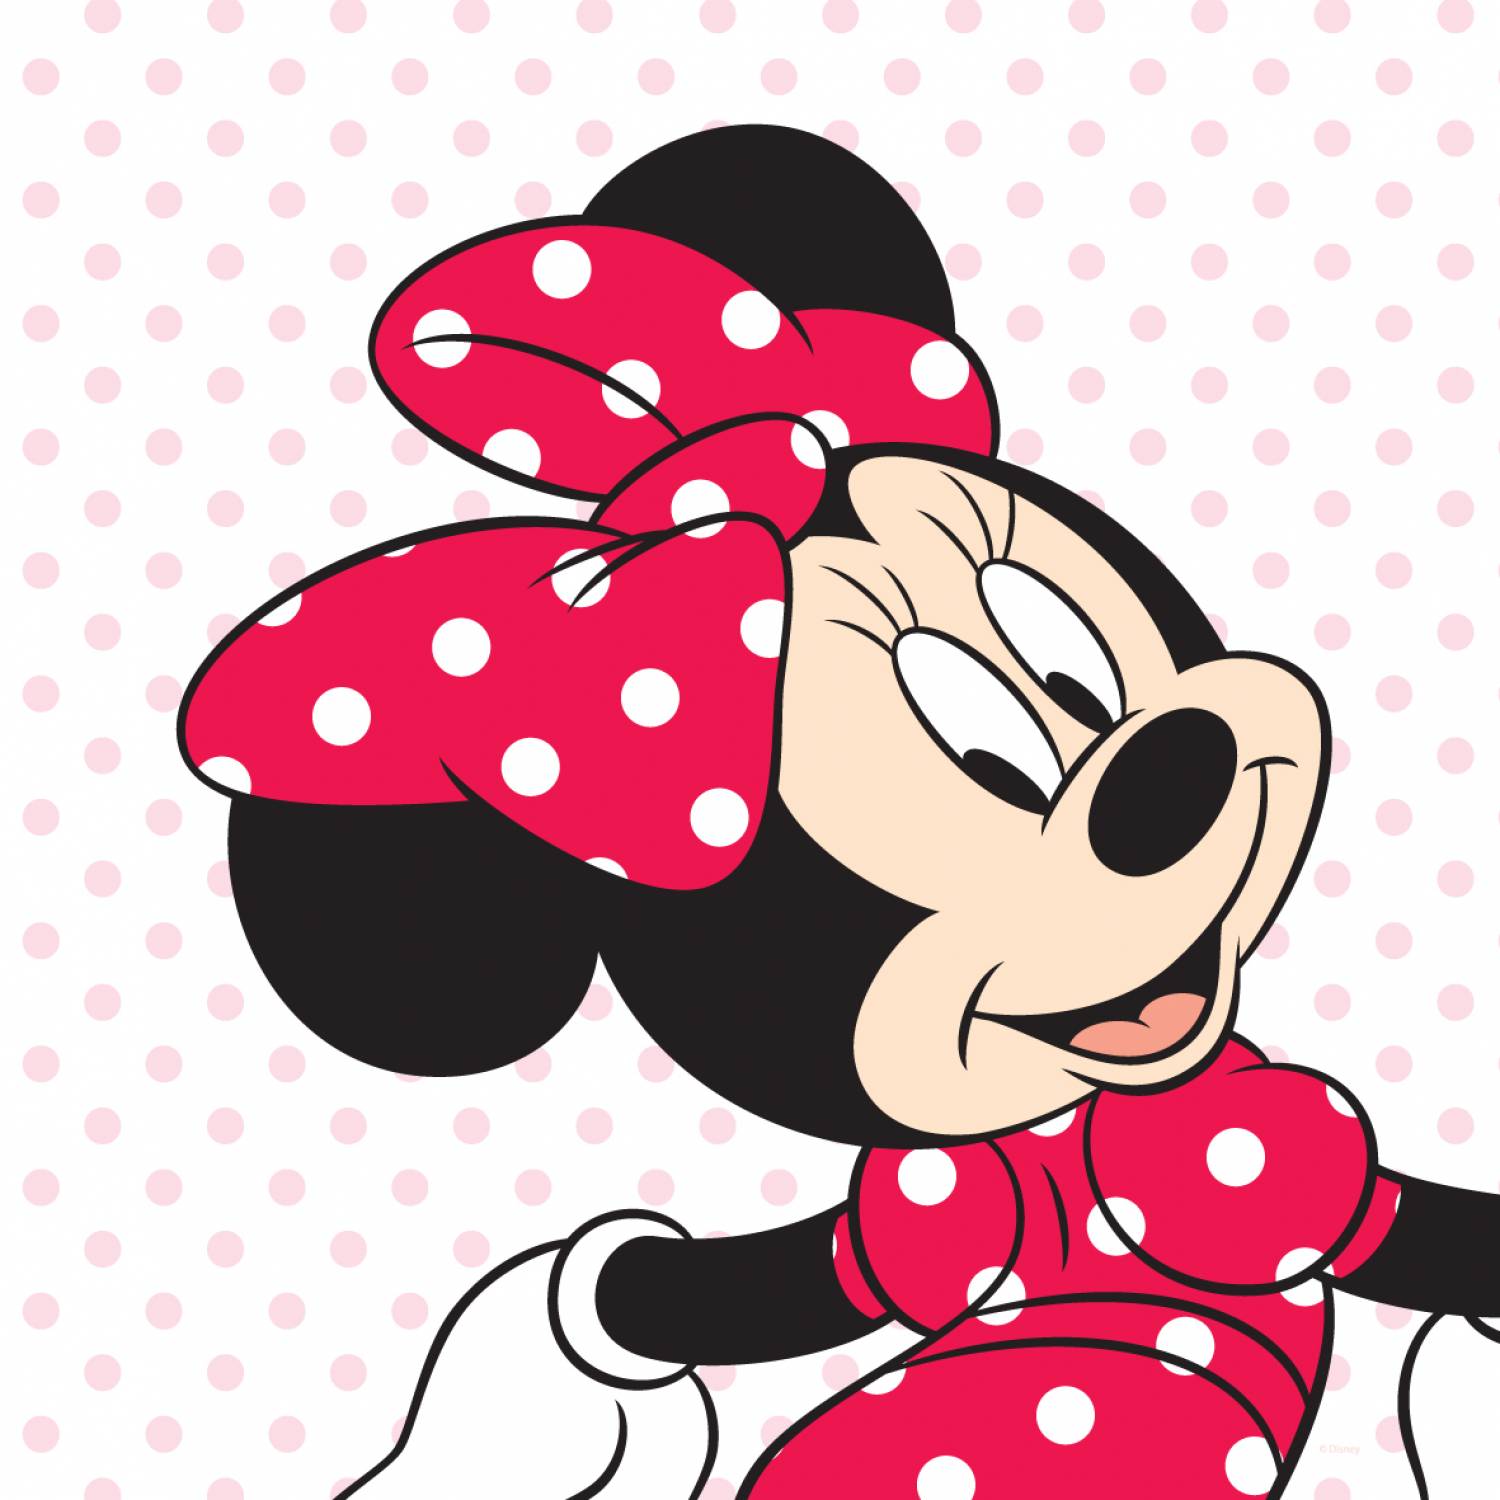 Outer space minnie mouse halloween clip art 240 x 260 15 kb gif